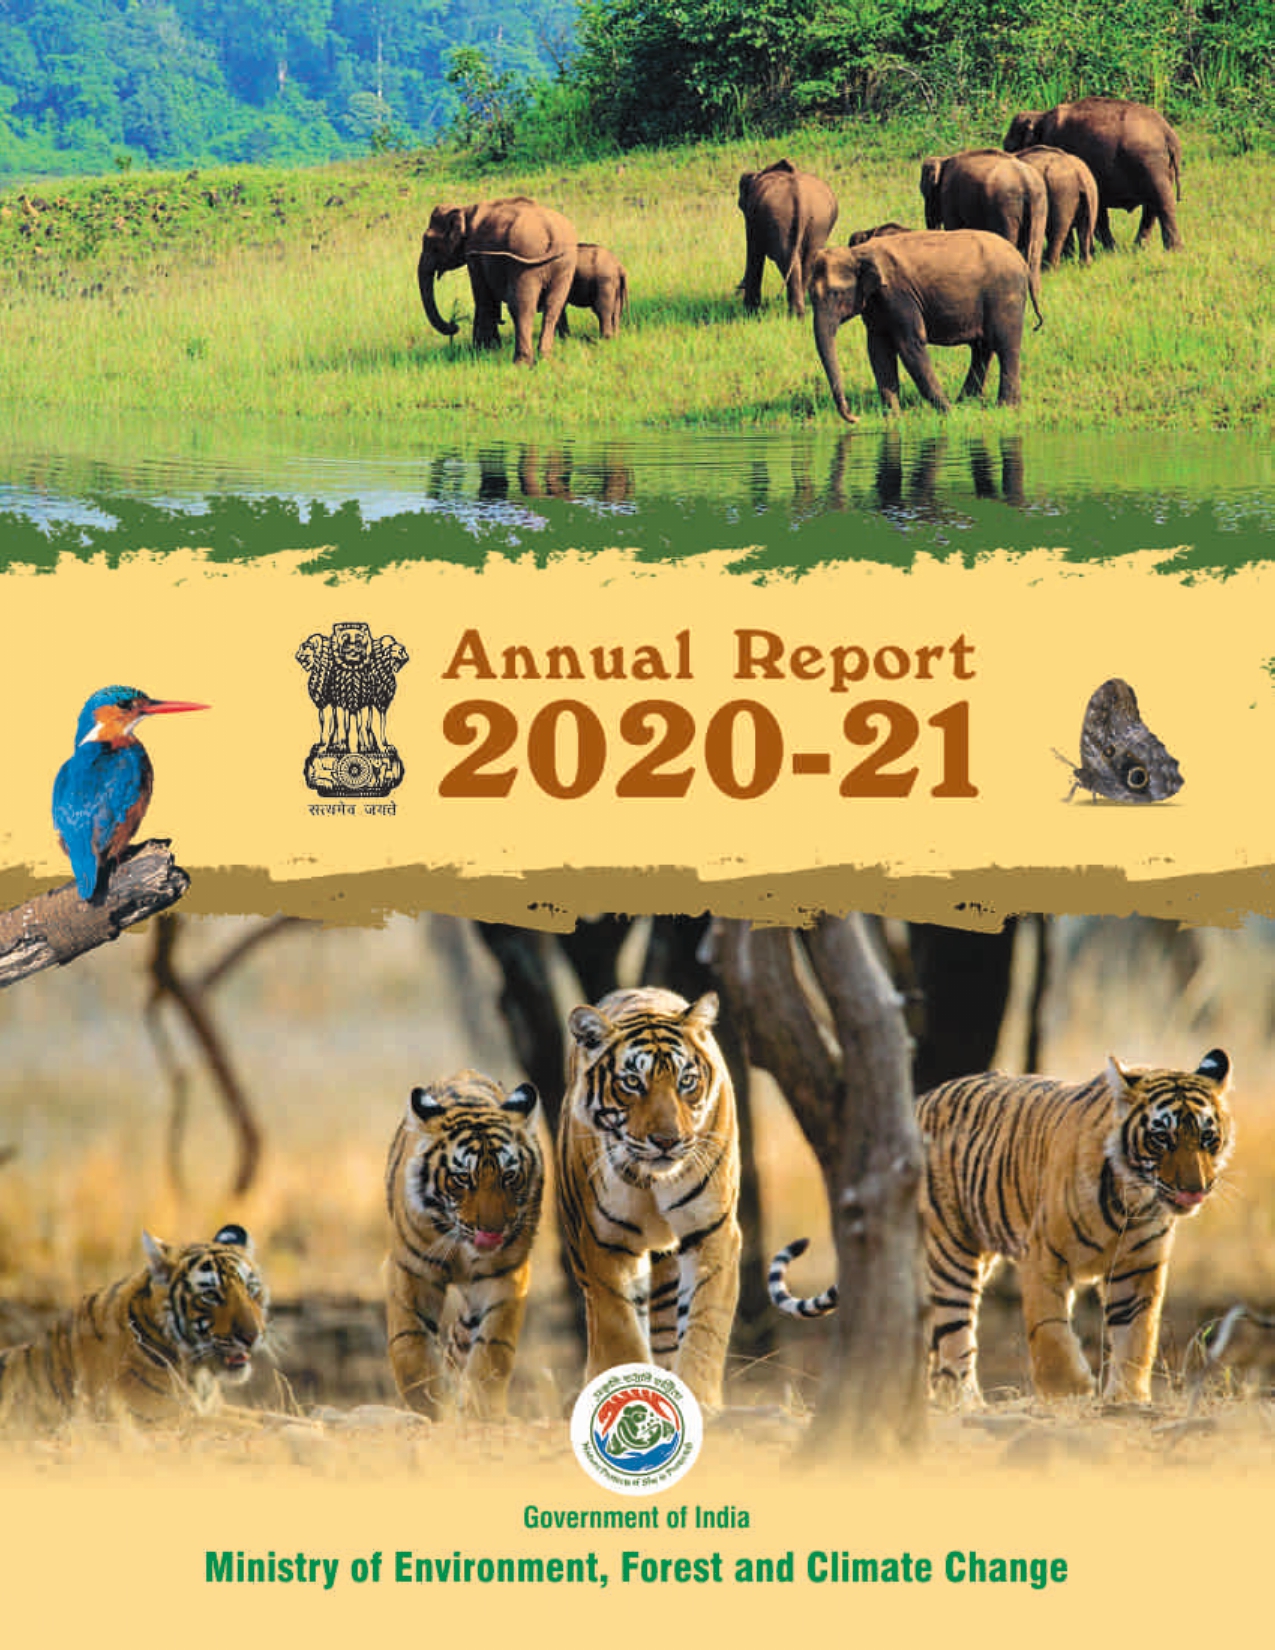 Image of Annual Report